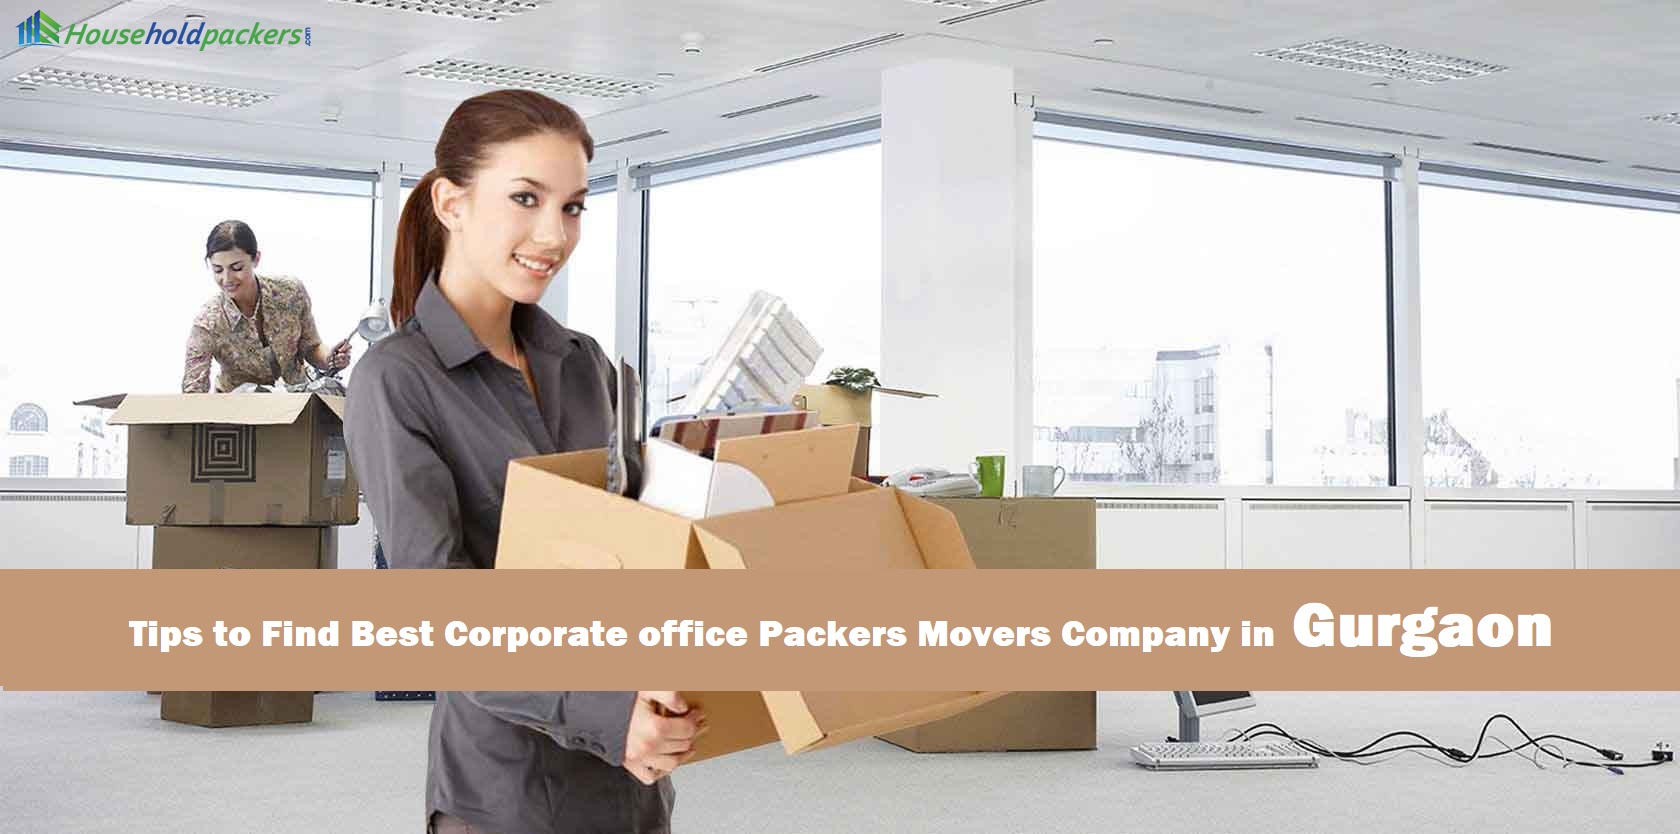 Tips to Find Best Corporate office Packers Movers Company in Gurgaon